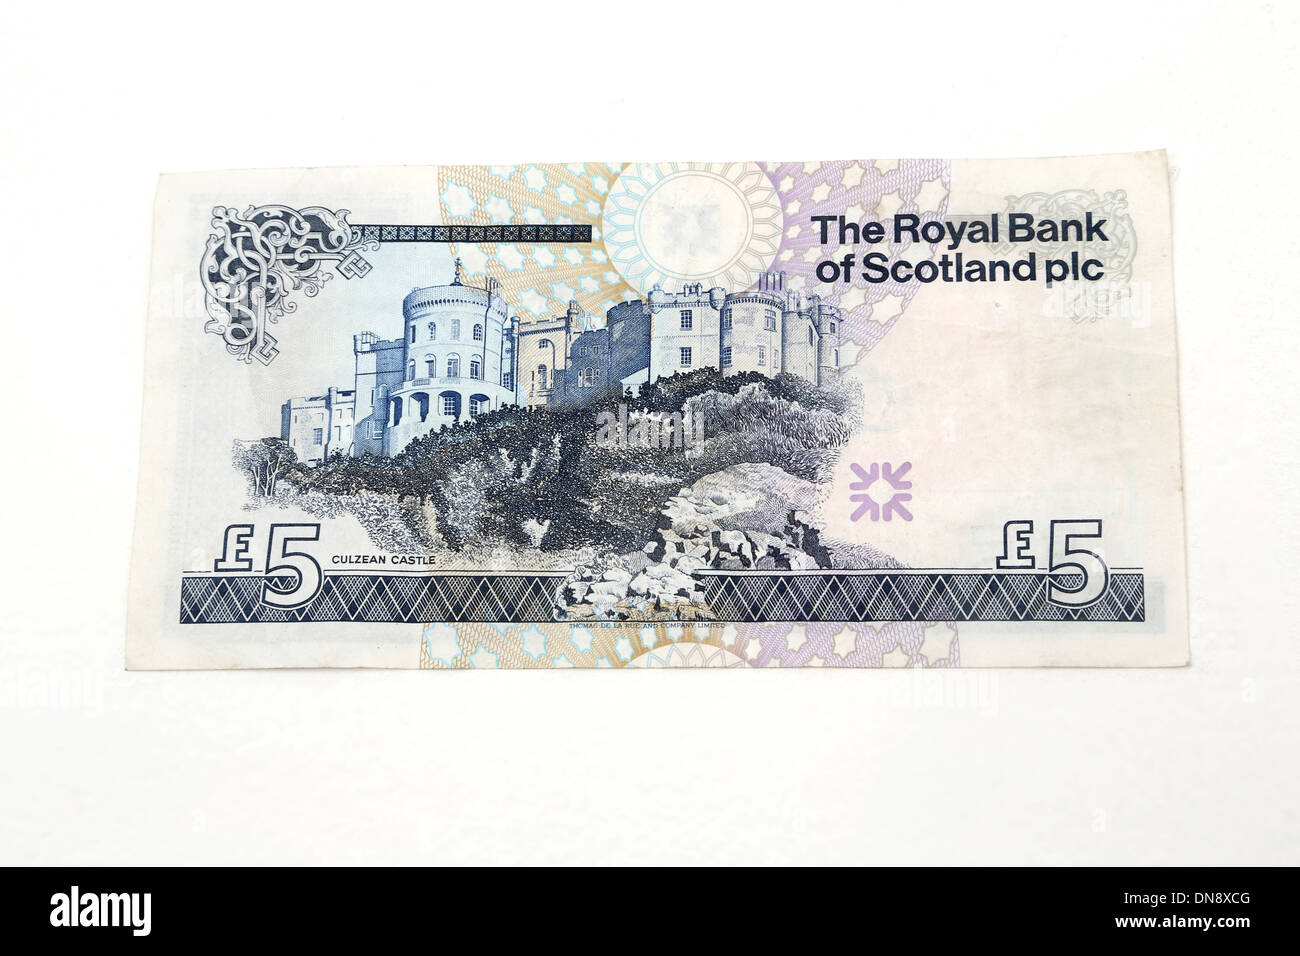 Royal Bank Of Scotland Five Pound Note With Image Of Culzean Castle Stock Photo